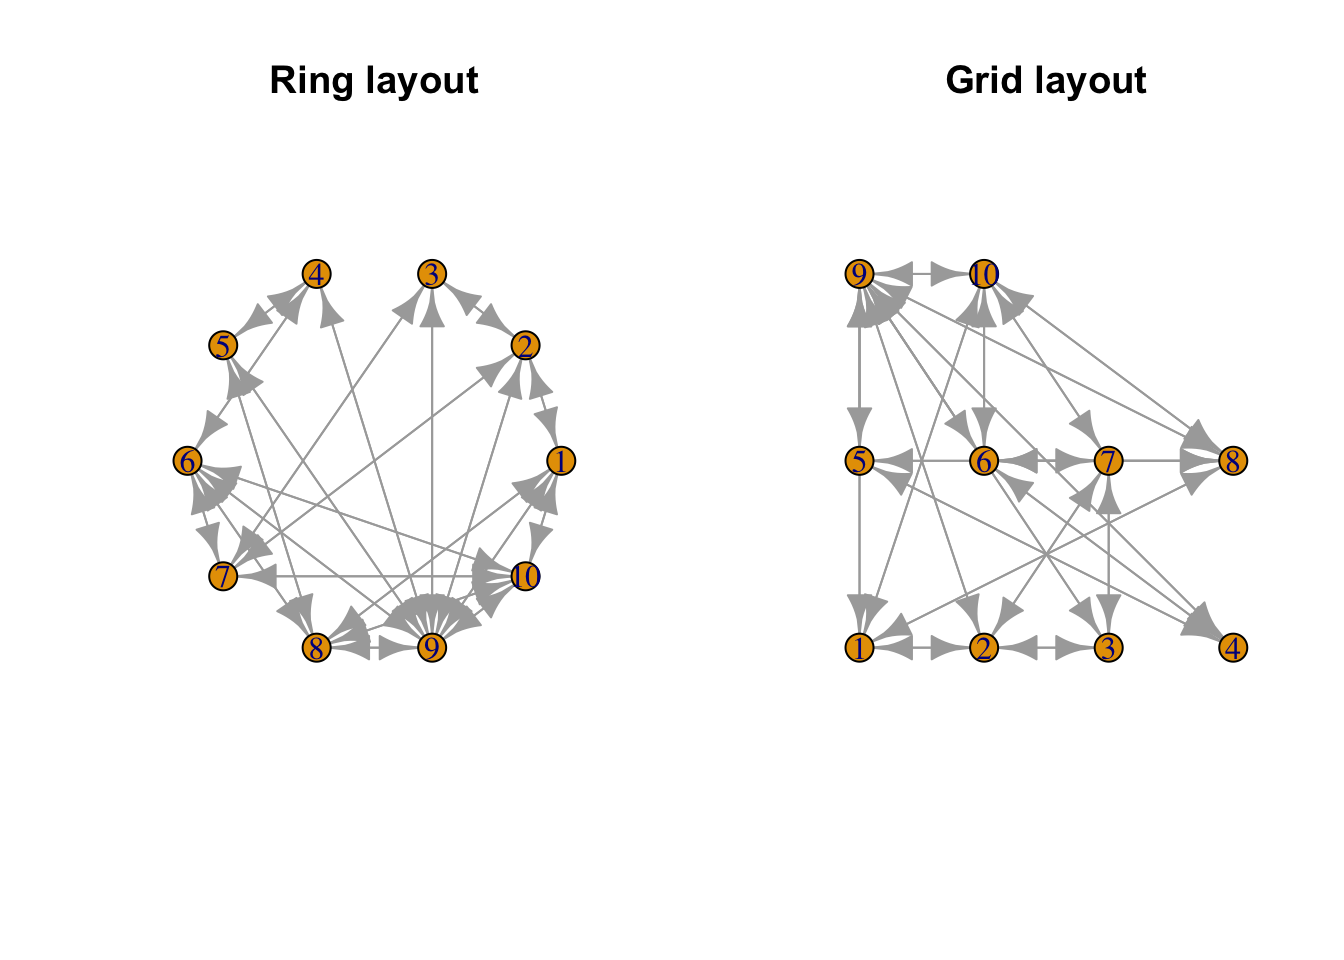 Example for two different network layouts, the grid and the ring.